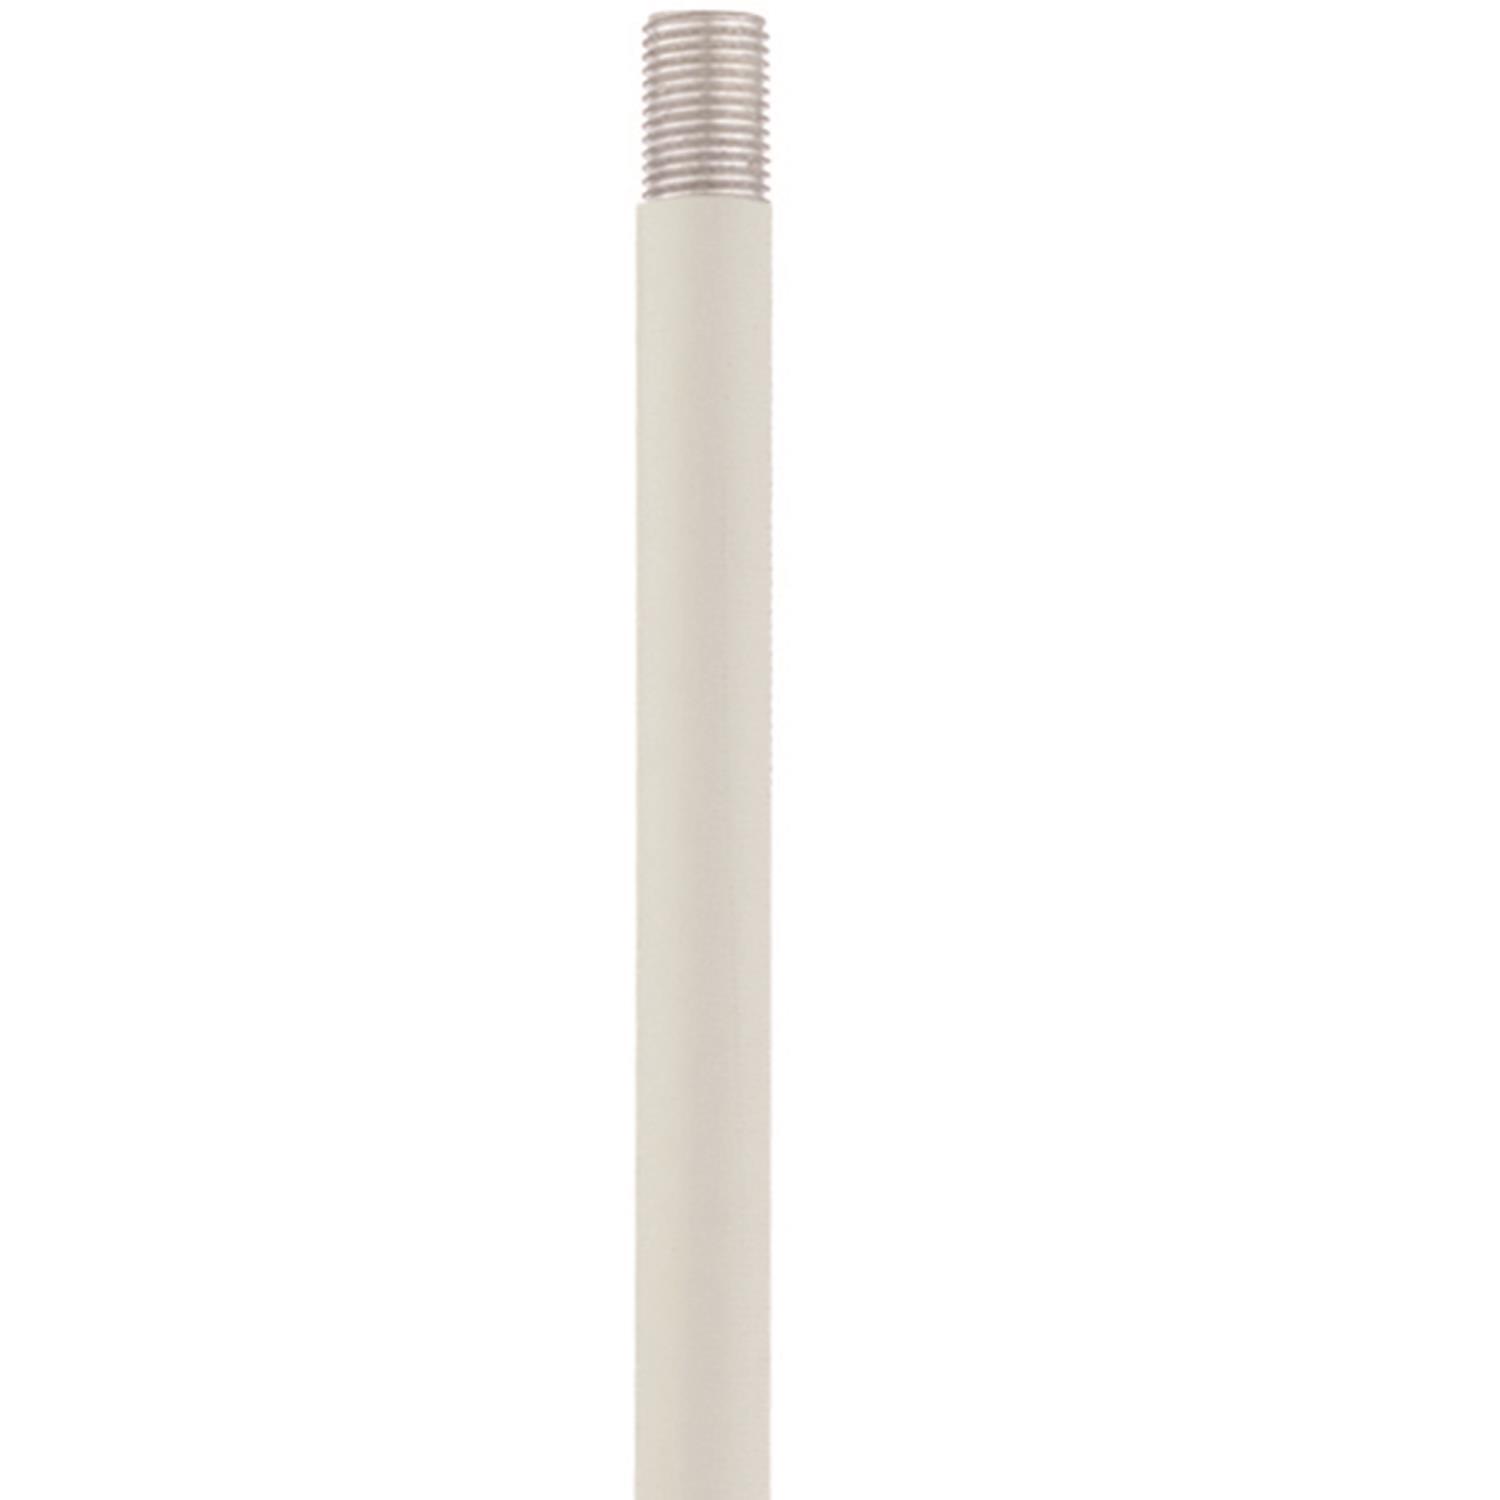 Livex Lighting Steel 12" Length Rod Extension Stem With White Finish 56050-03